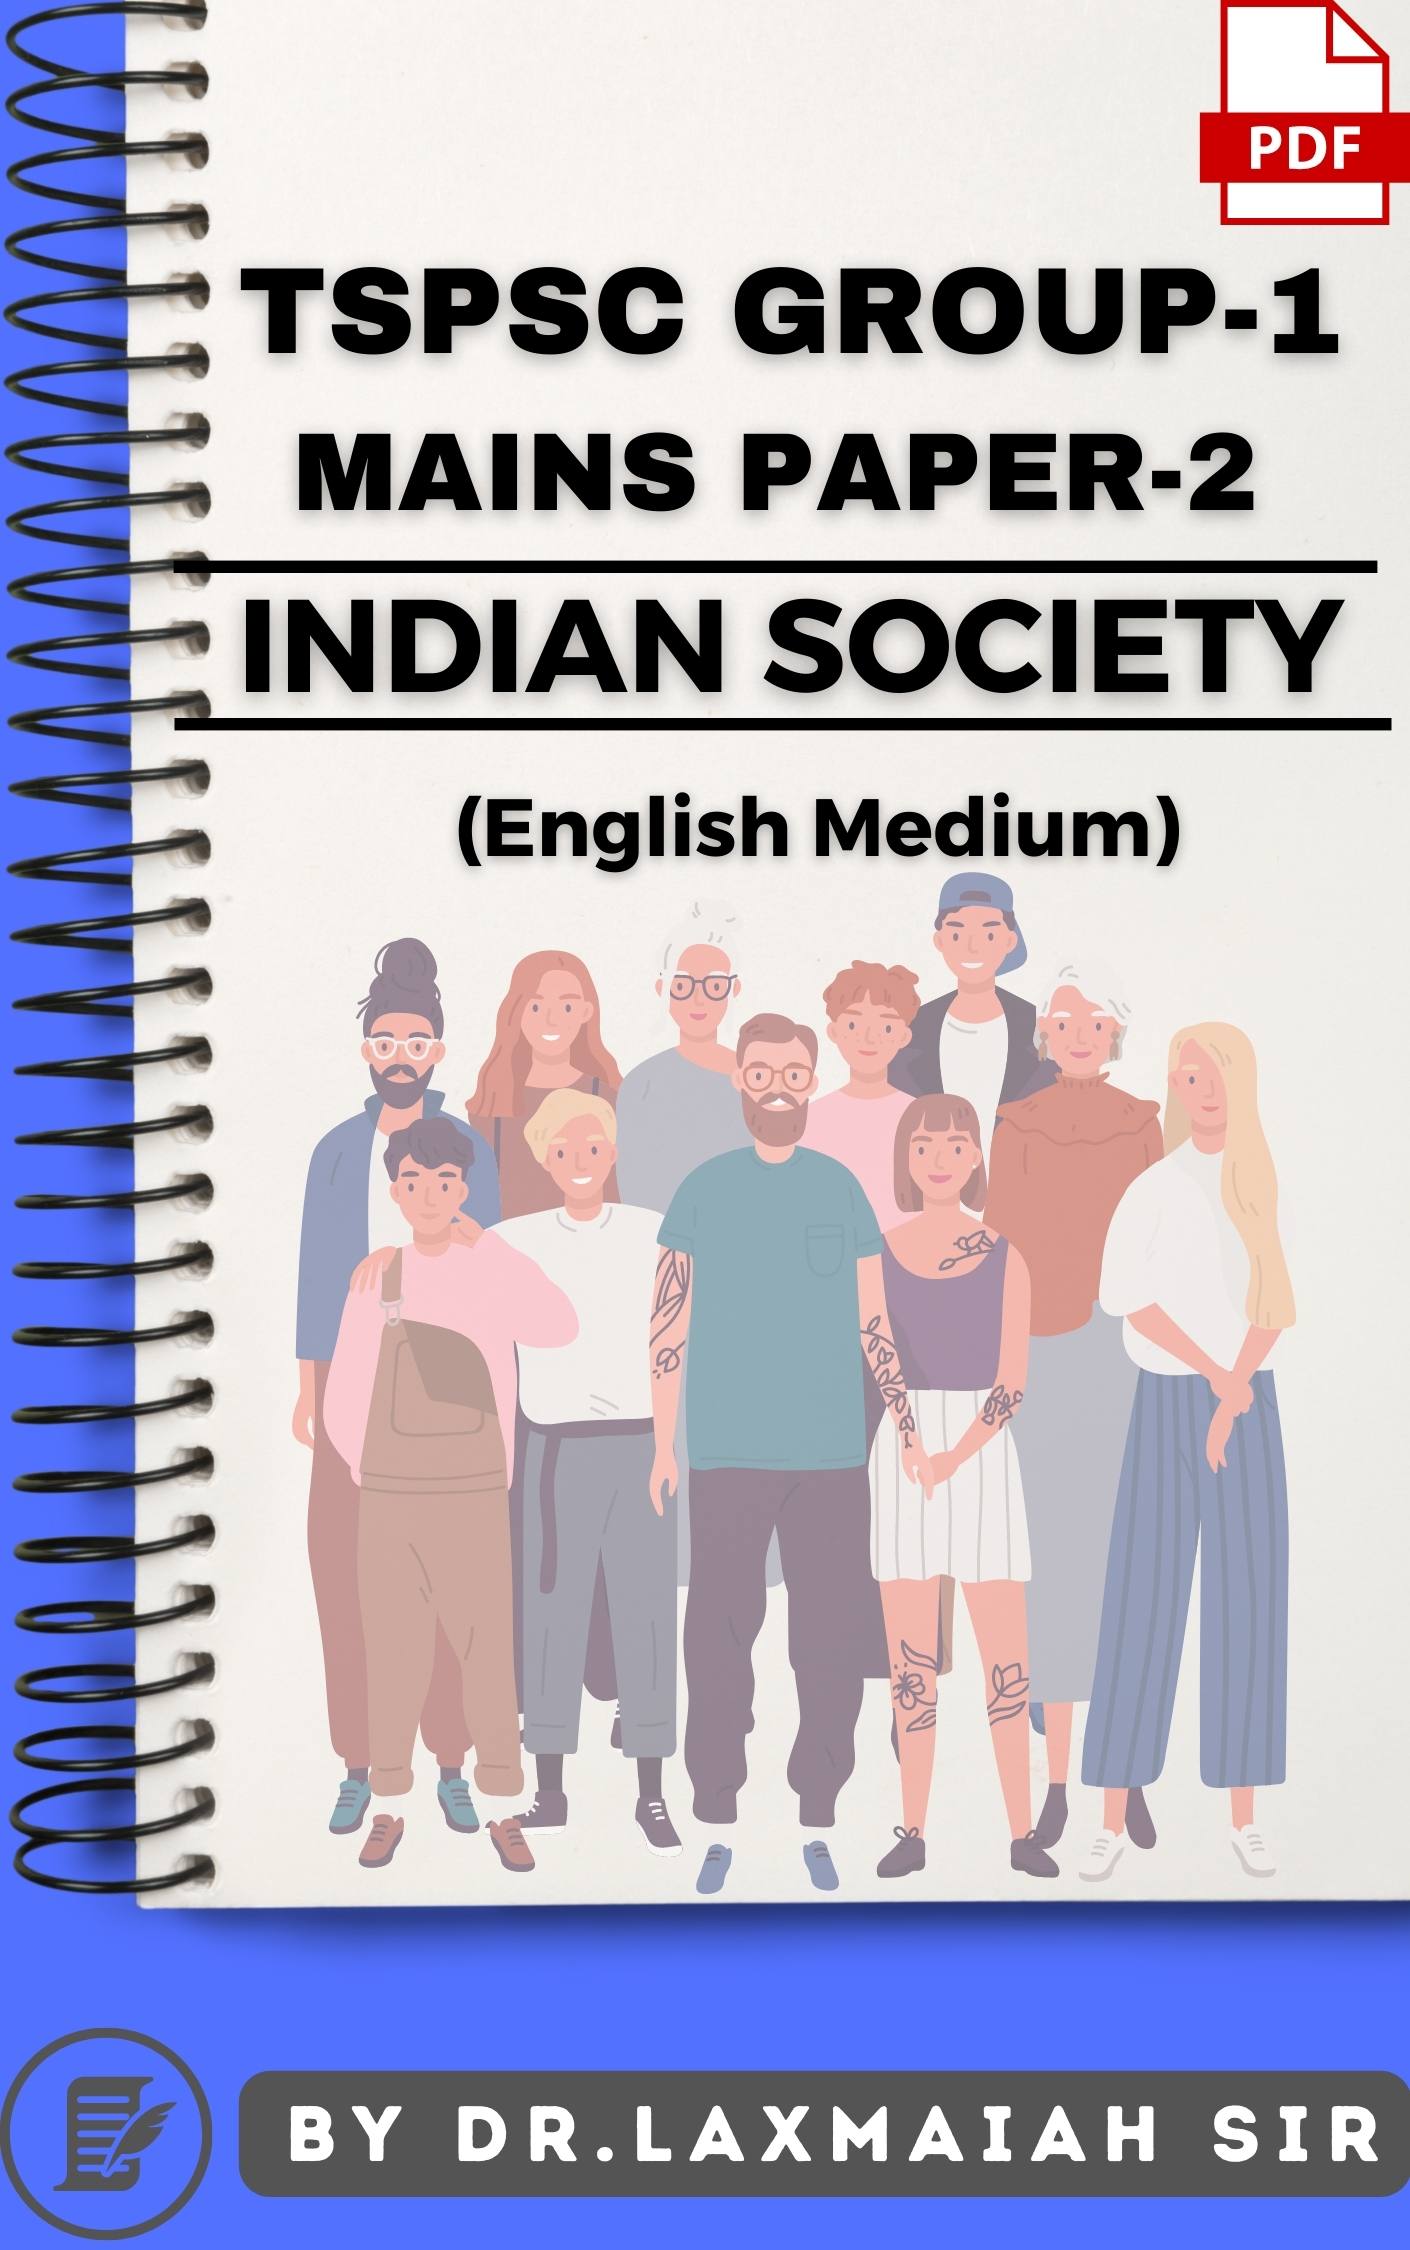 TSPSC Group-1 (Mains) Paper-2 Indian Society by Dr. Laxmaiah (Handwritten Class Notes - English Medium)